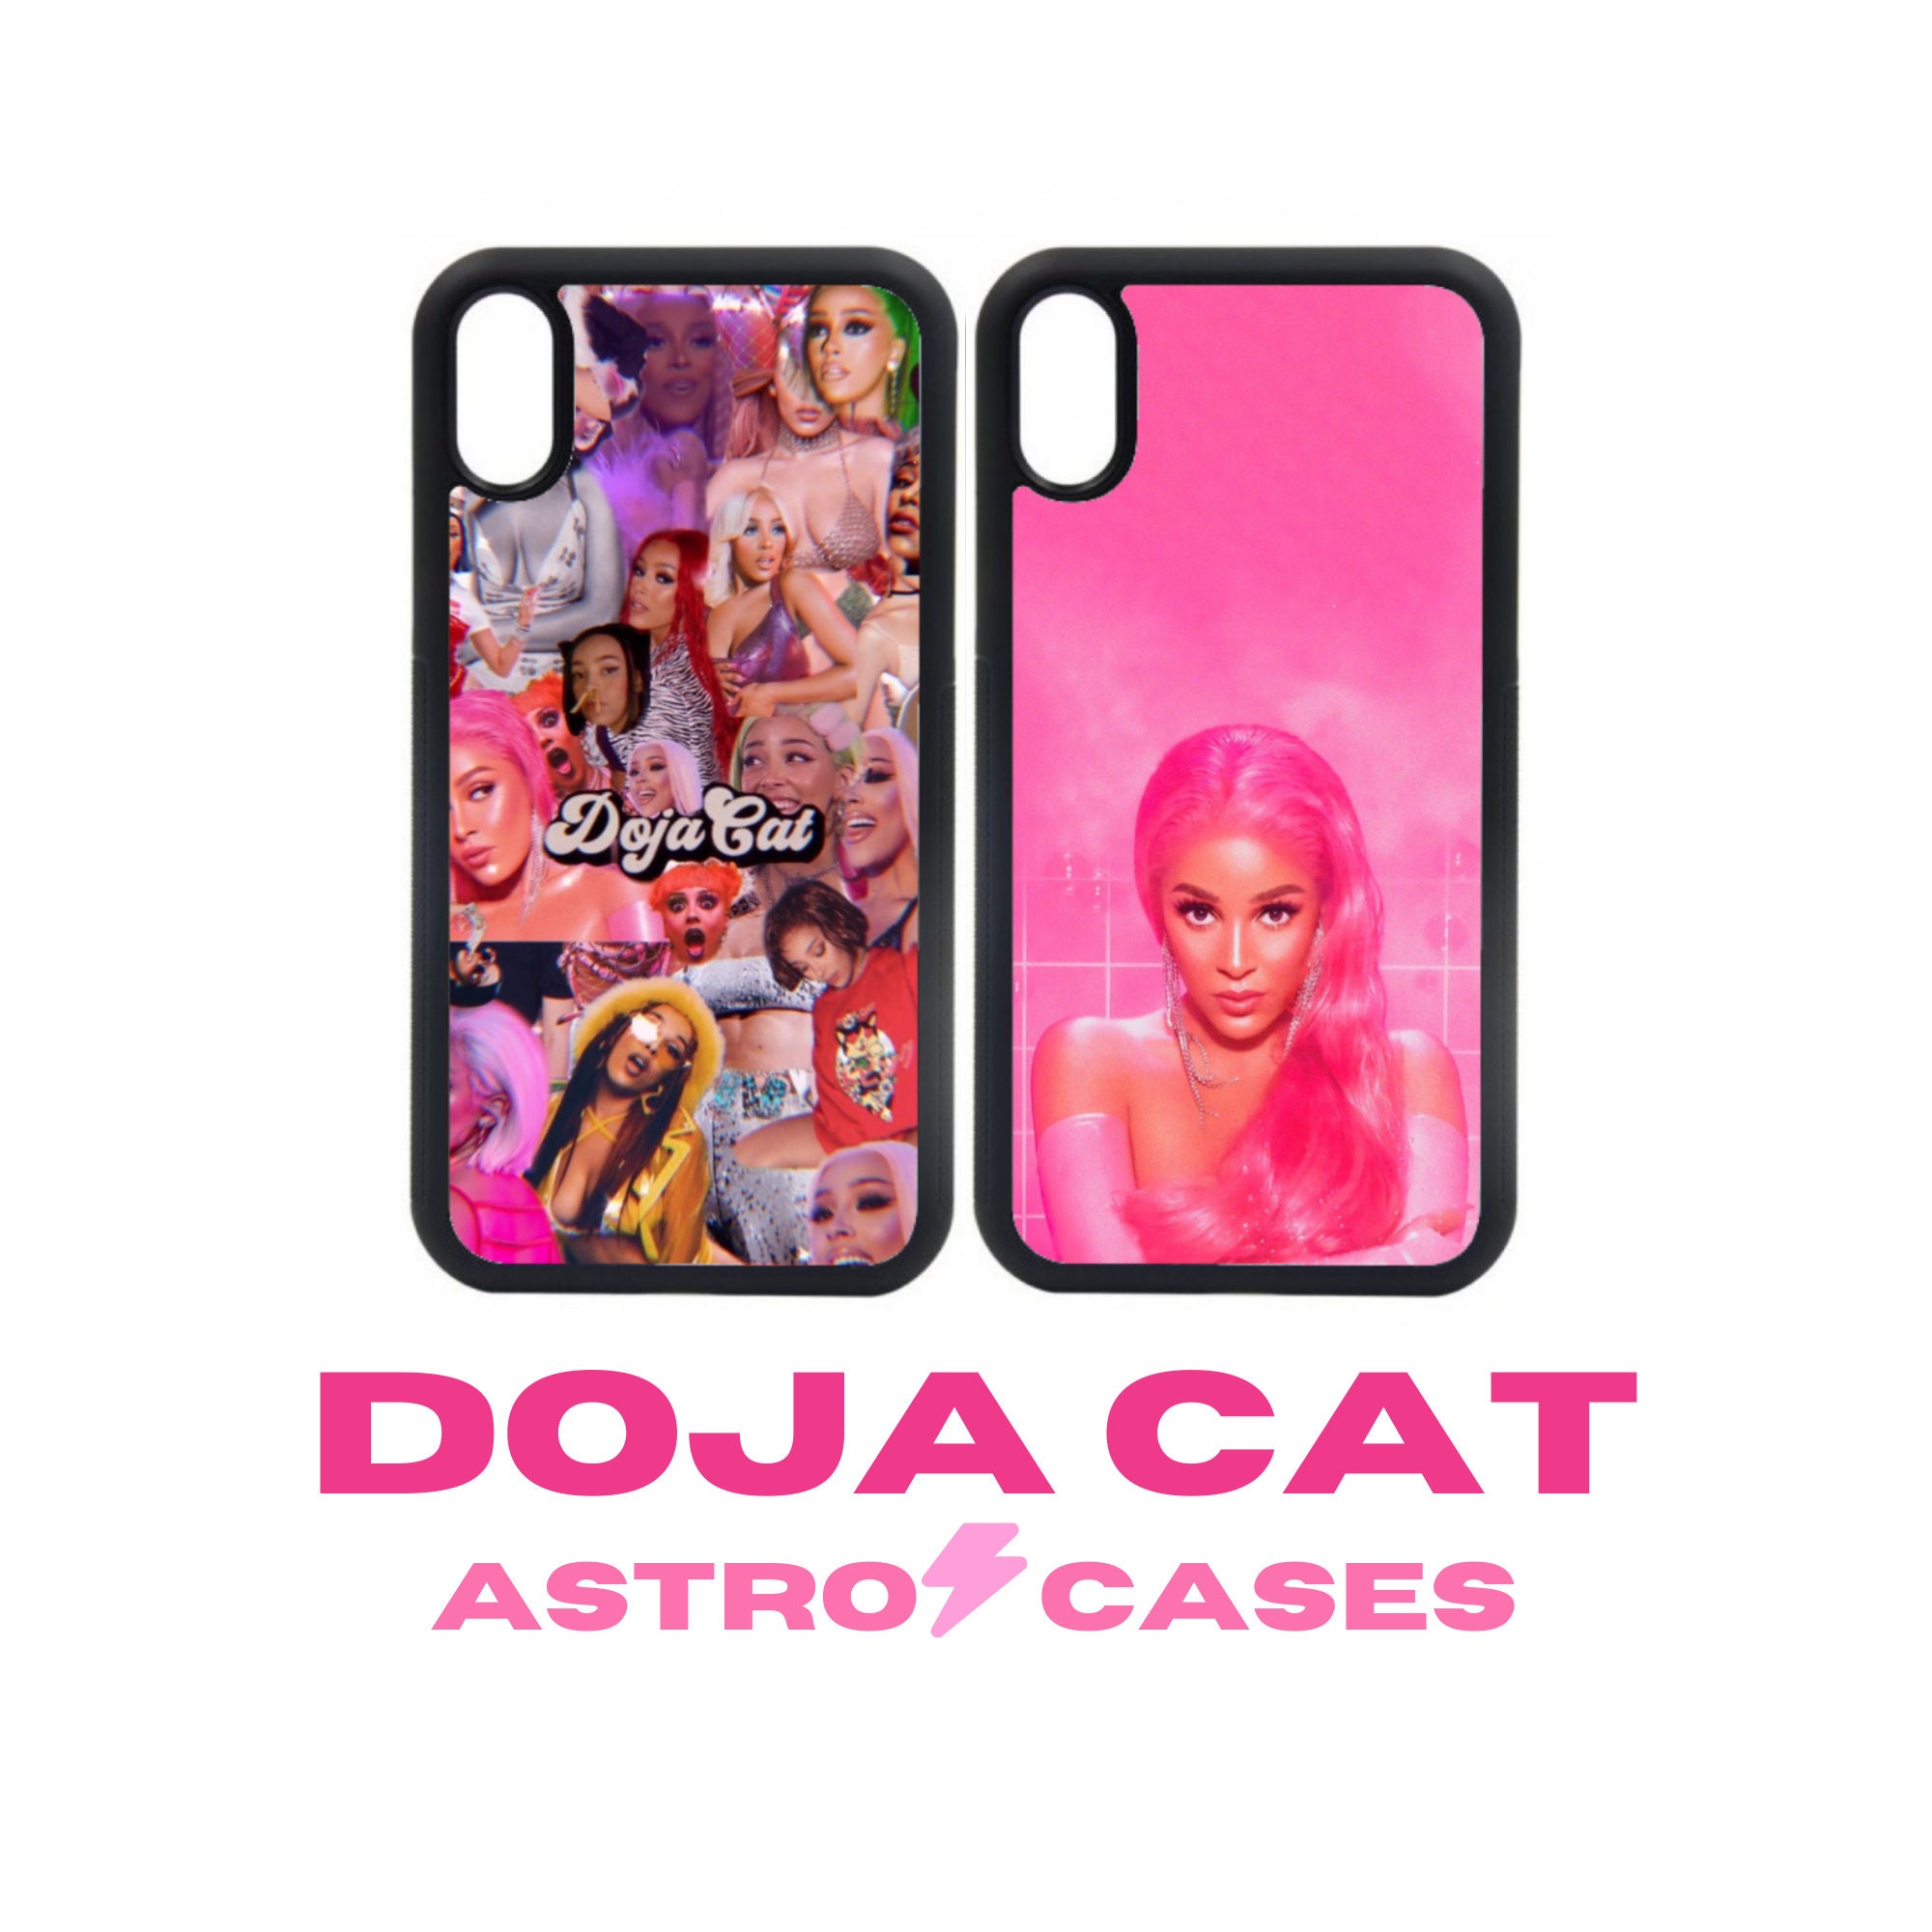 IPhone Xr Planet Her iPhone 13 iPhone SE 2020 Doja cat Doja Cat Phone Case Iphone 12 iPhone 8 Hot Pink IPhone 11 Kiss me more